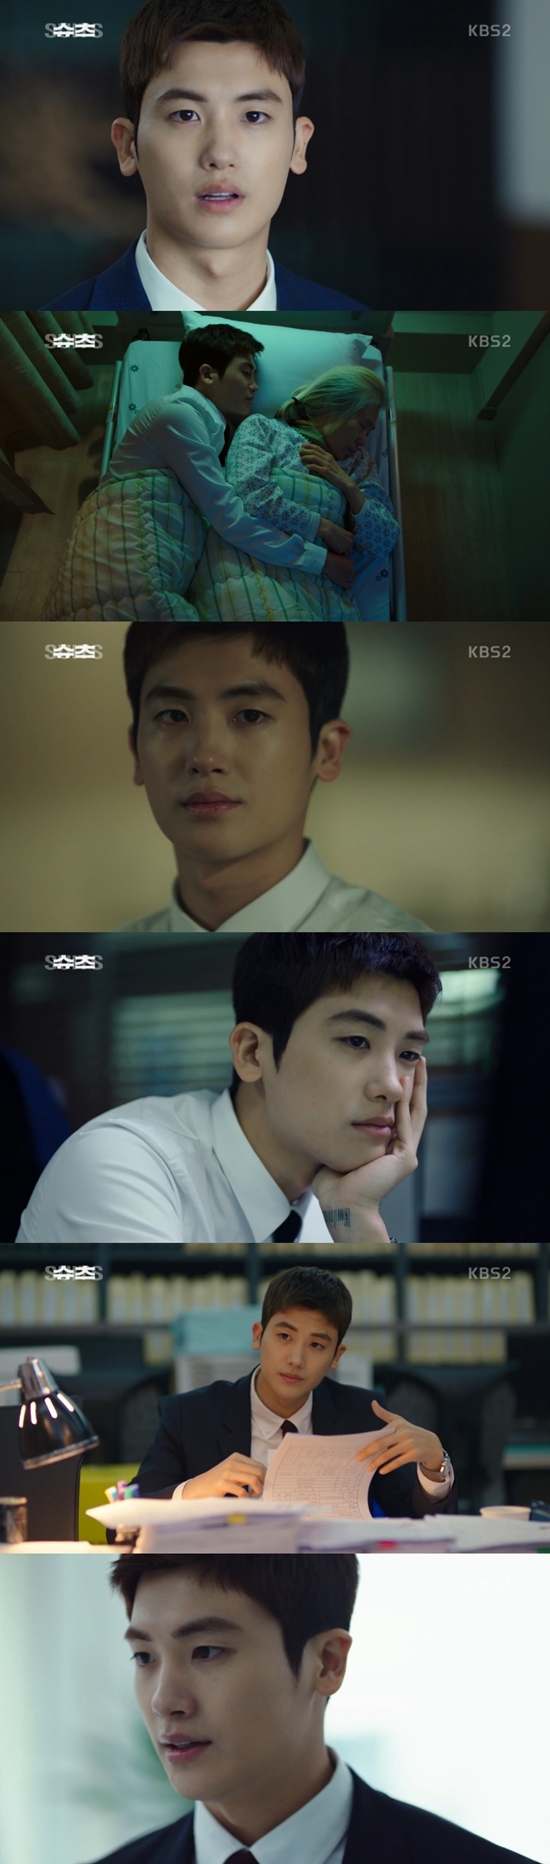 Suits fake lawyer Park Hyung-sik, why would you like to cheer him up? Park Hyung-sik played the role of fake new lawyer Ko Yeon-woo in KBS2s new arboretum Suits (playwright Kim Jung-min, director Kim Jin-woo).Ko Yeon-woo is a man with a genius memory that he never forgets when he sees and understands once, and a empathy ability to disarm his opponent.The story of Suits is the story of facing the opportunity of fake lawyer in front of the door of a world where he is rarely opened.He is a man of two abilities that are difficult to have only one. He has the charm of stealing his eyes.It is also true that even the main character of the drama can have such a perfect and enviable character.However, Ko Yeon-woo brings a consensus to viewers that I want to cheer up rather than different from me. In the second episode of Suits broadcast on the 26th, the special aspect of such a character was more intensely touched by the character expression of Park Hyung-sik.On this day, Ko Yeon-woo made his first job as a fake new lawyer.As soon as he first came to work, he received a dismissal notice, but he survived the best law firm in Korea again due to the desperation of standing at the edge of the cliff. After that, Ko Yeon-woo was not a real lawyer, but he solved the situations given in his own way.He listened to his clients story and succeeded in witting and using the situation cleverly.Park Hyung-sik has a thrilling pleasure and surrogate satisfaction to viewers who have not had any of the conditions for the title of lawyer, but he is awkward, but he is struggling with the problem. Park Hyung-sik is melting in Suits, containing both parts of the character such as brightness, darkness, sharpness and softness.When his brain flashes, the exclamation of genius comes out.On the other hand, even though he is a friend who put himself in a crisis, he can not be tough, or when he goes to a grandmother who is hospitalized and sleeps together in a narrow bed, he makes a person to see.In this sense, Park Hyung-siks character expression ability shown in Suits is special.This is because it made viewers sympathize and support the complex situation, various aspects, and emotions of the person named Ko Yeon-woo.